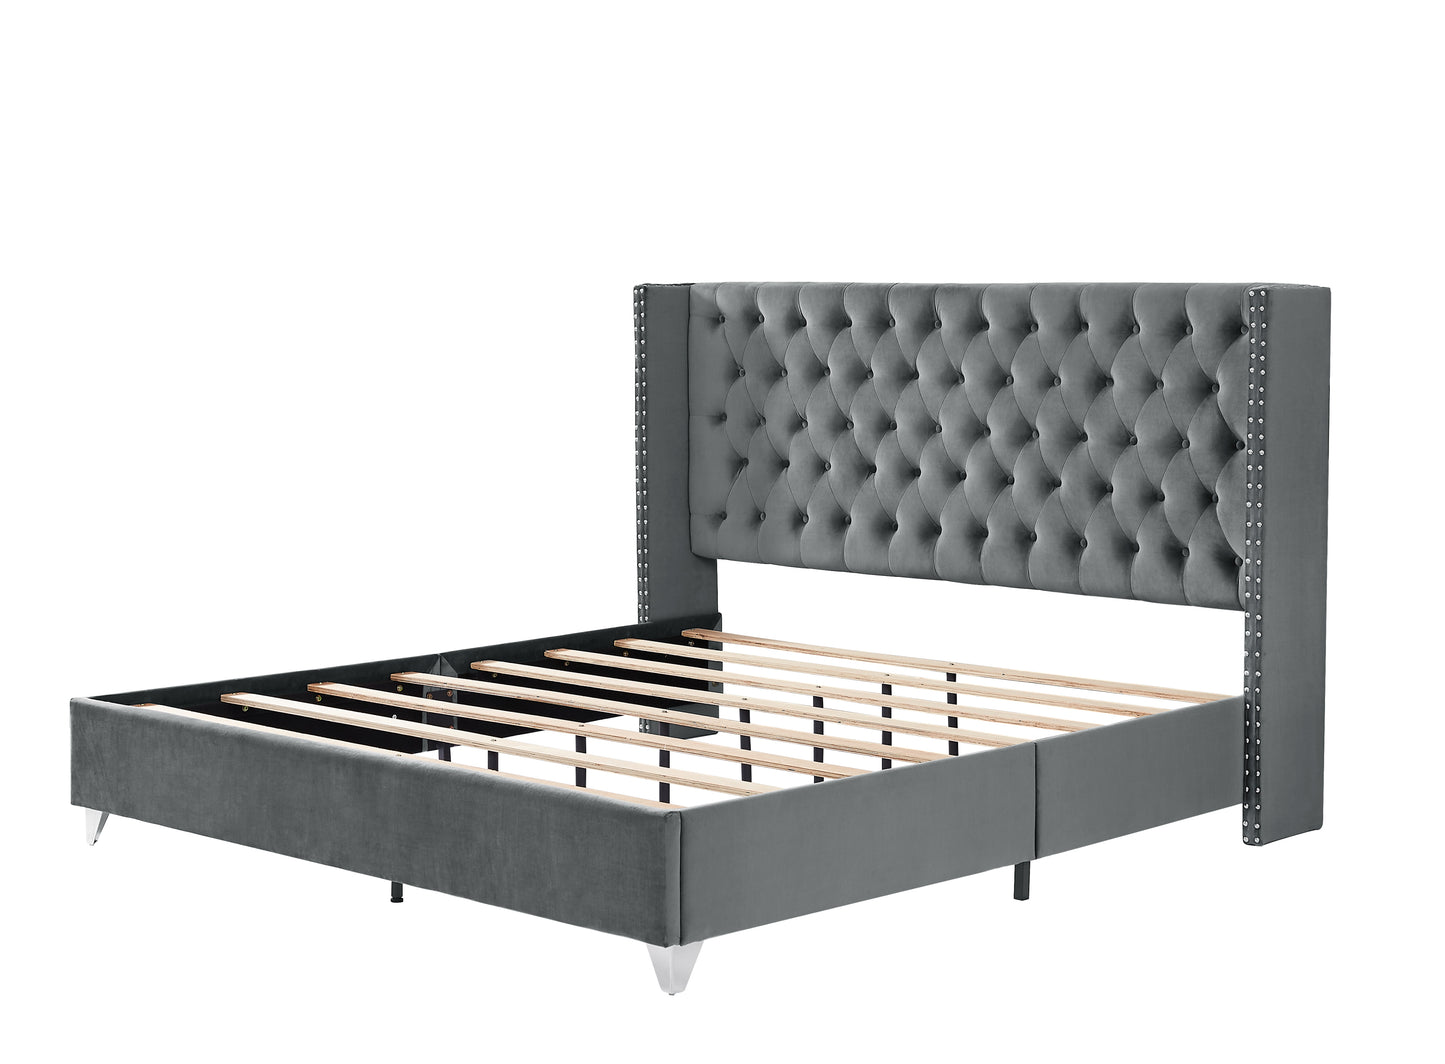 Caine King Bed (gray)